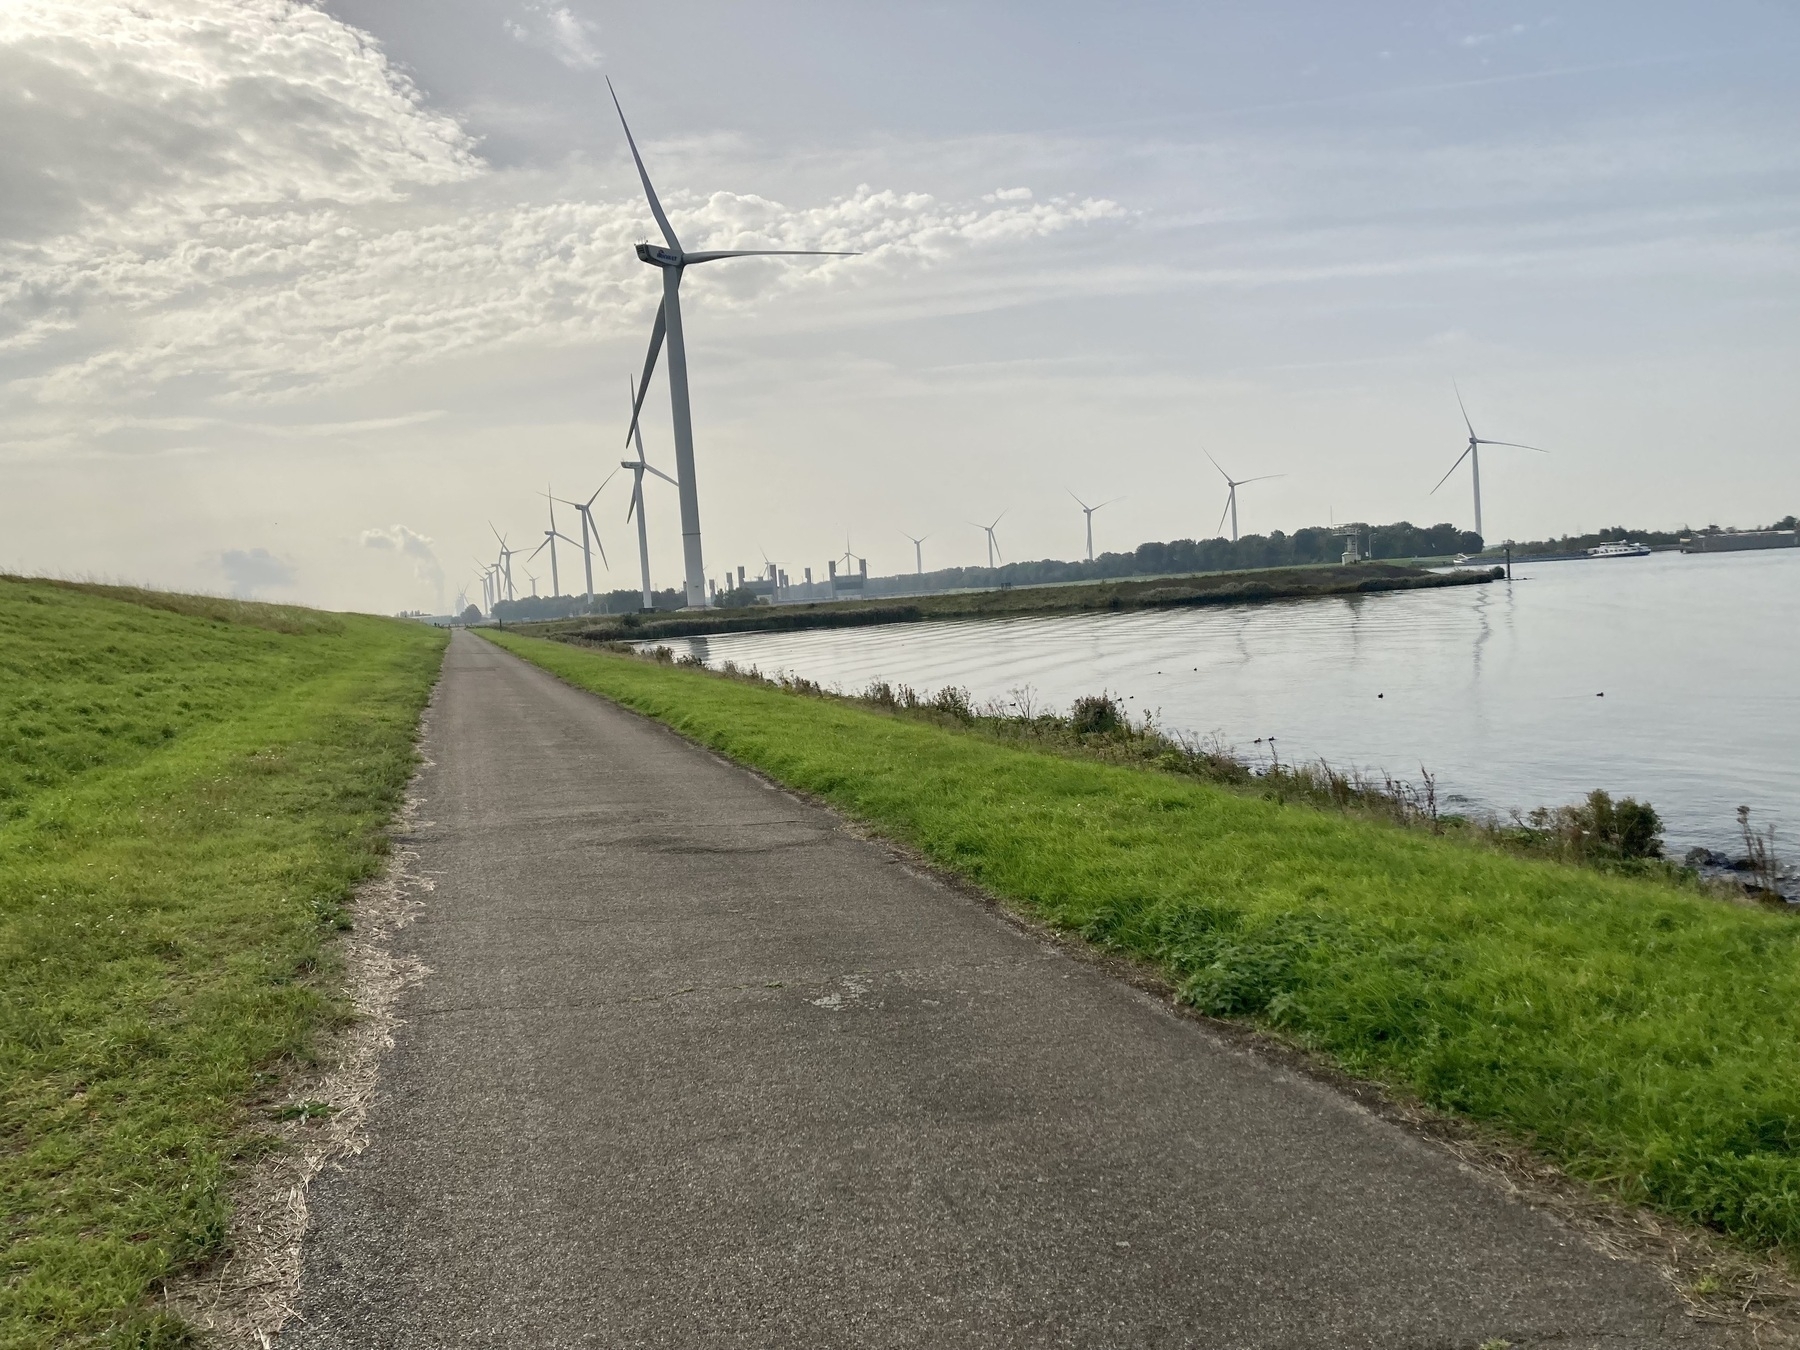 cycling path alongside the canal between the rivers Rhine and Scheldt